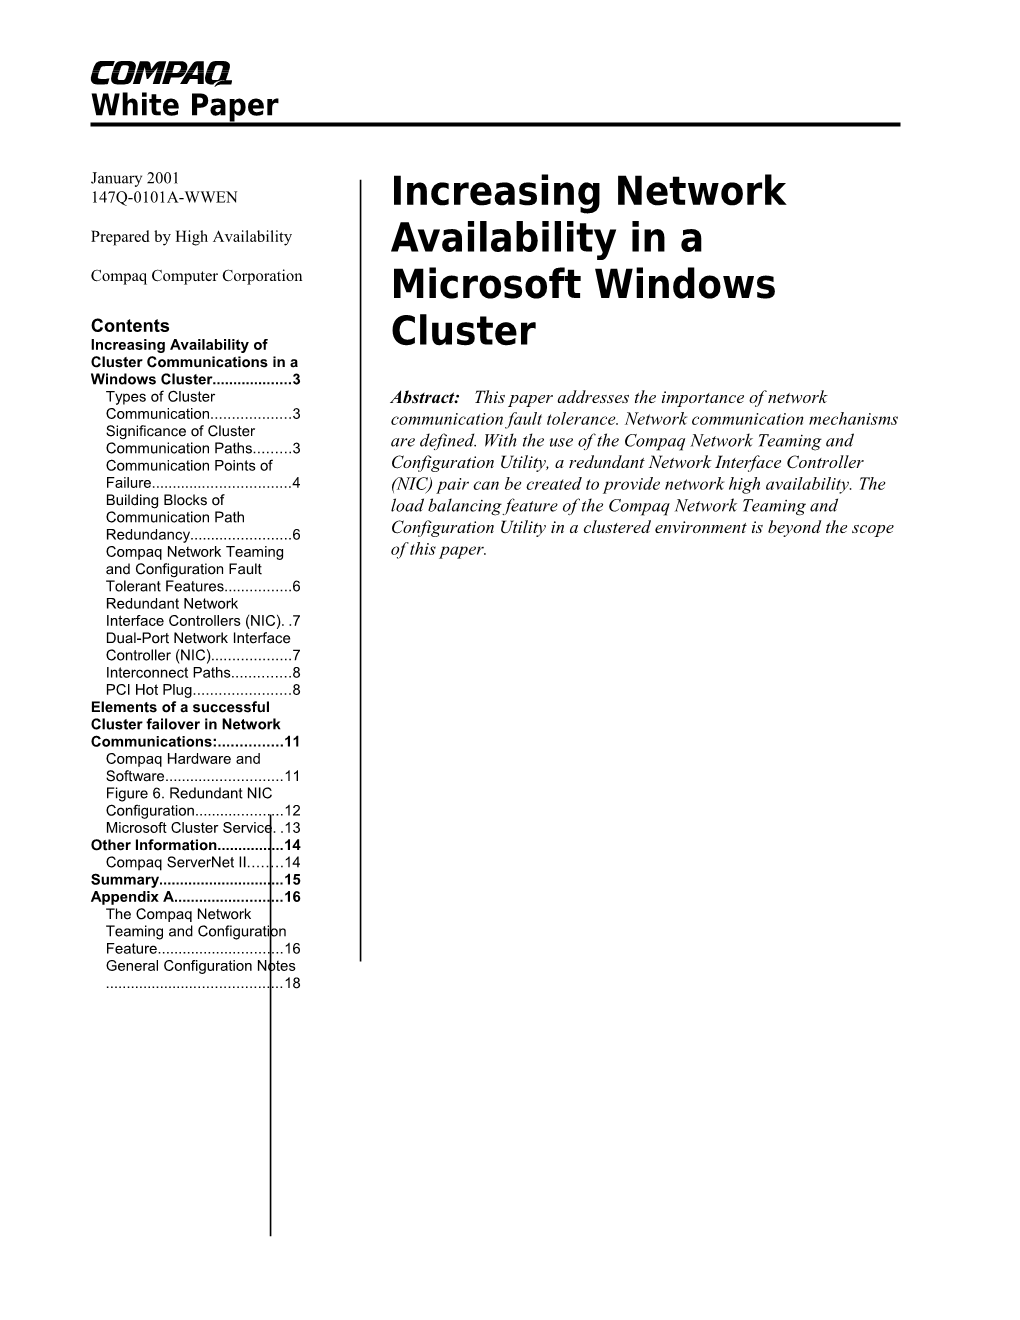 Increasing Network Availability in a Microsoft Windows Cluster